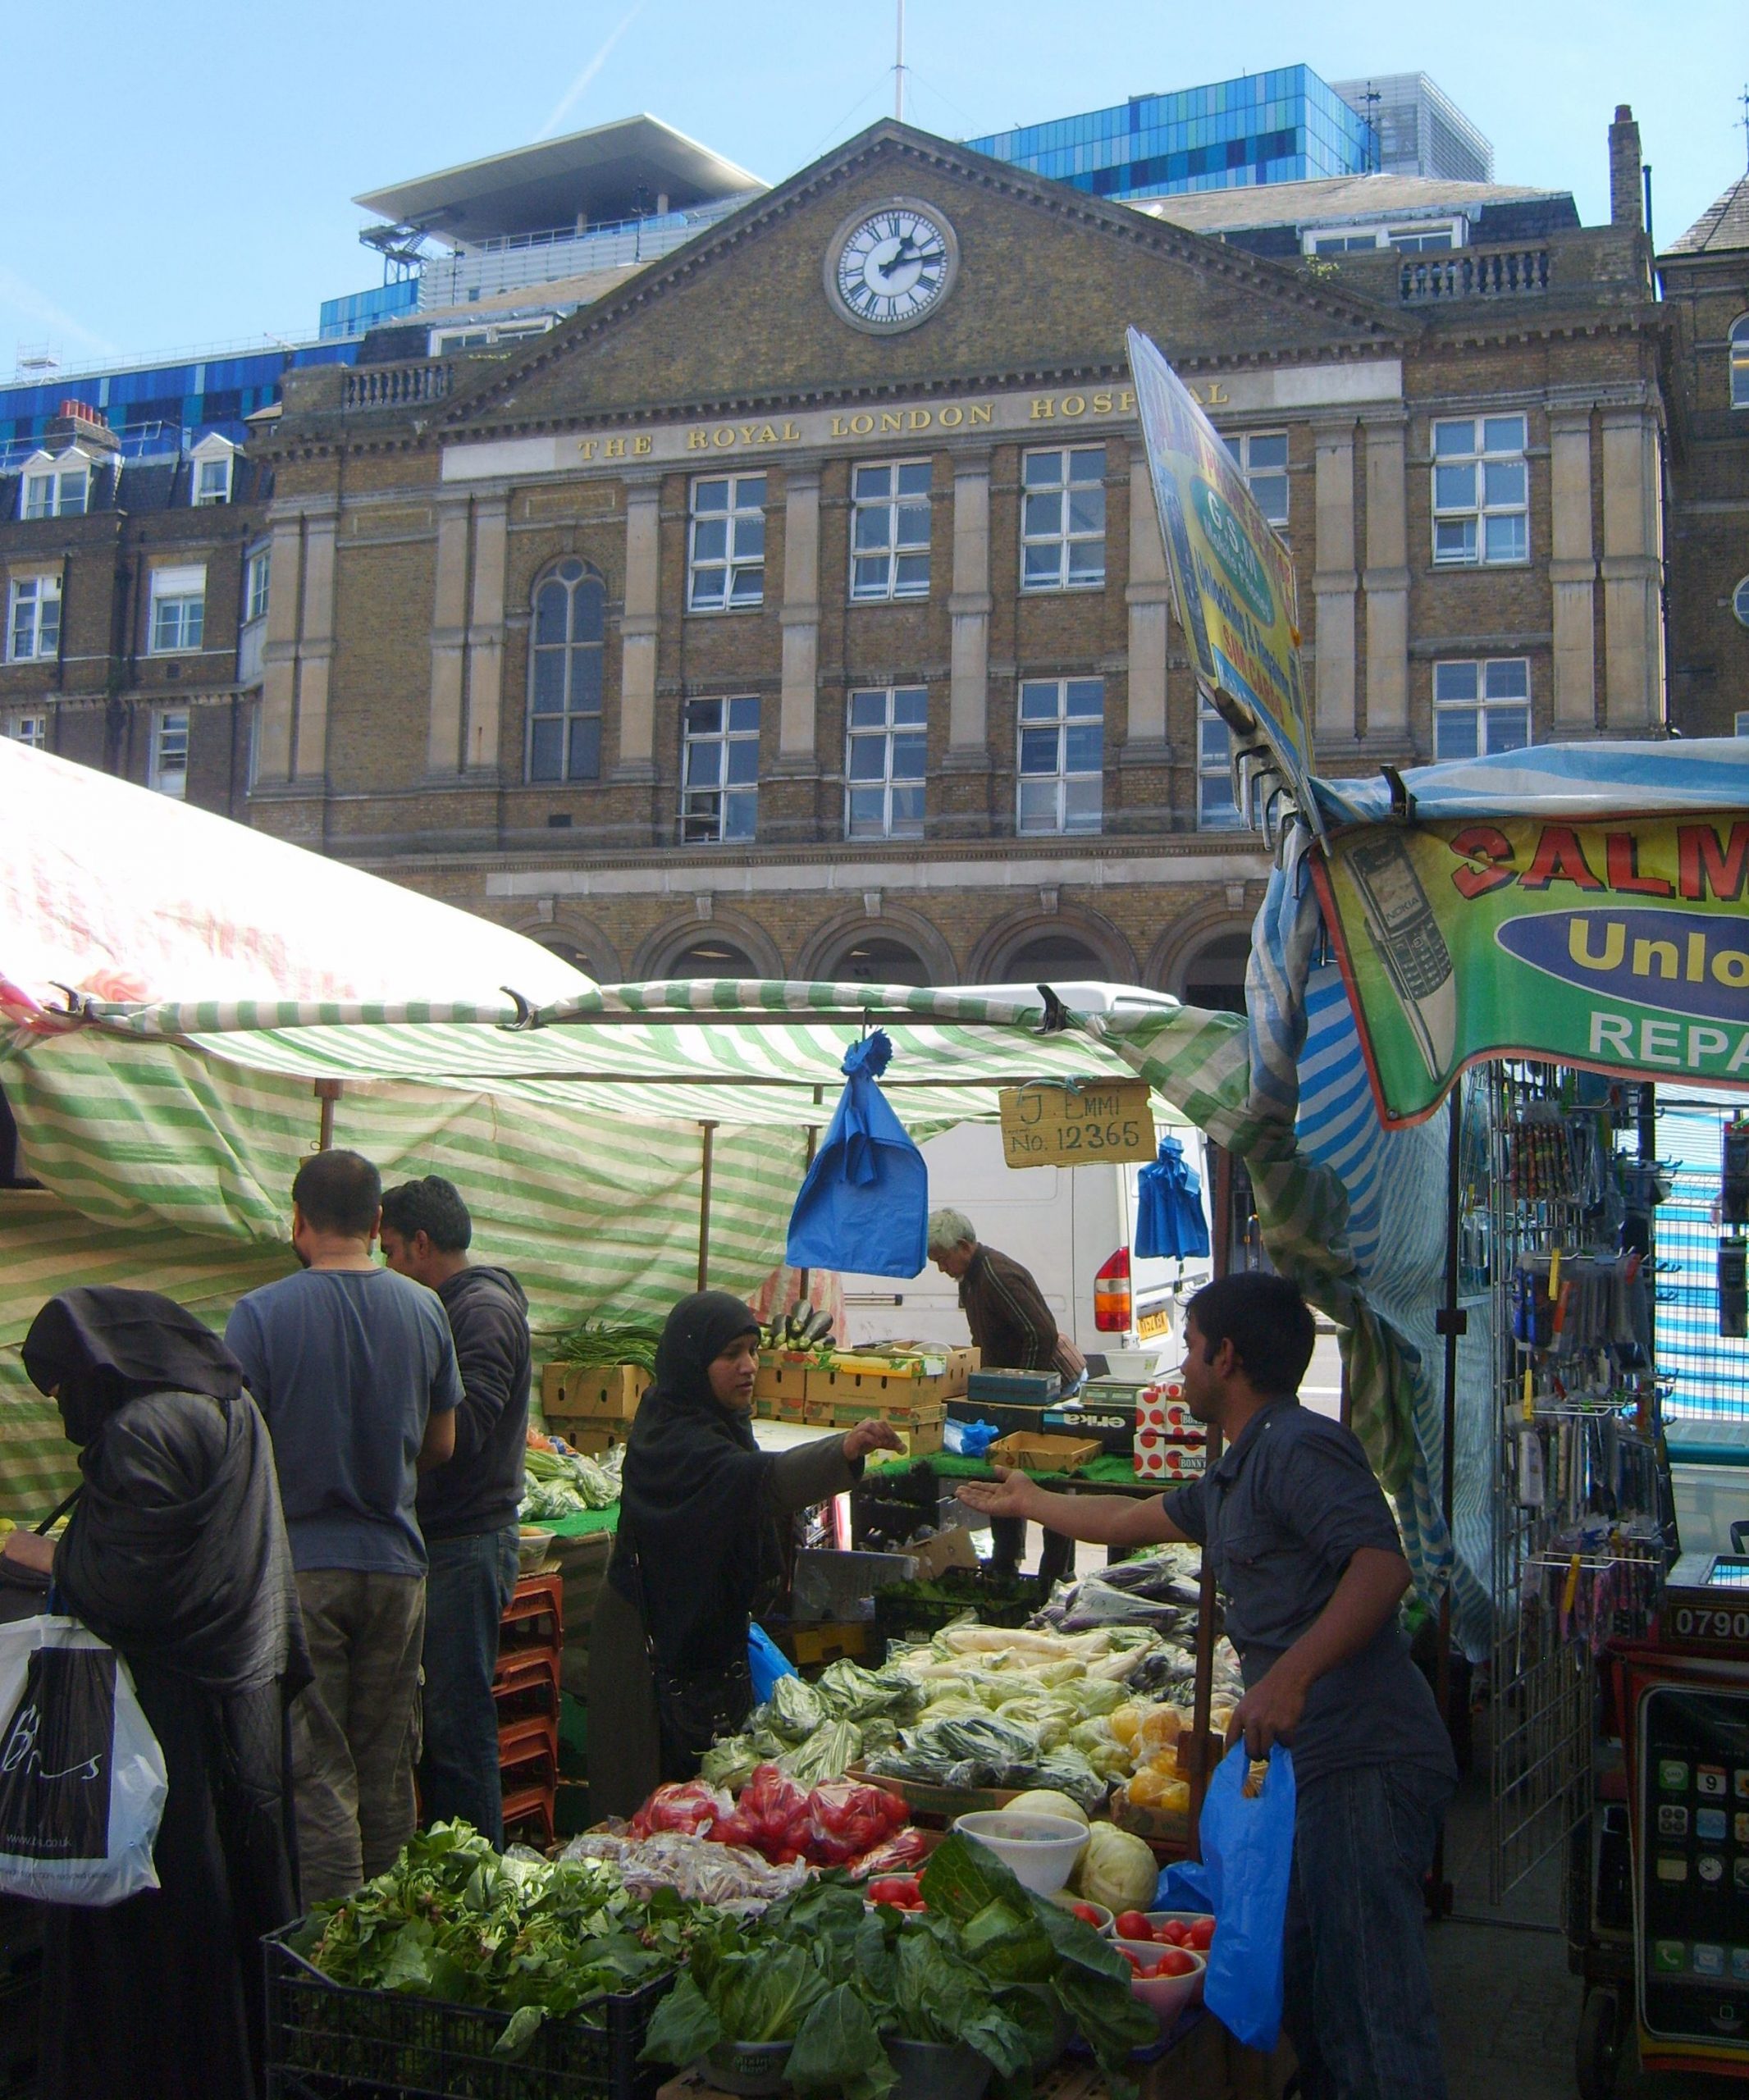 Photo of Whitechapel Market with London Hospital in background